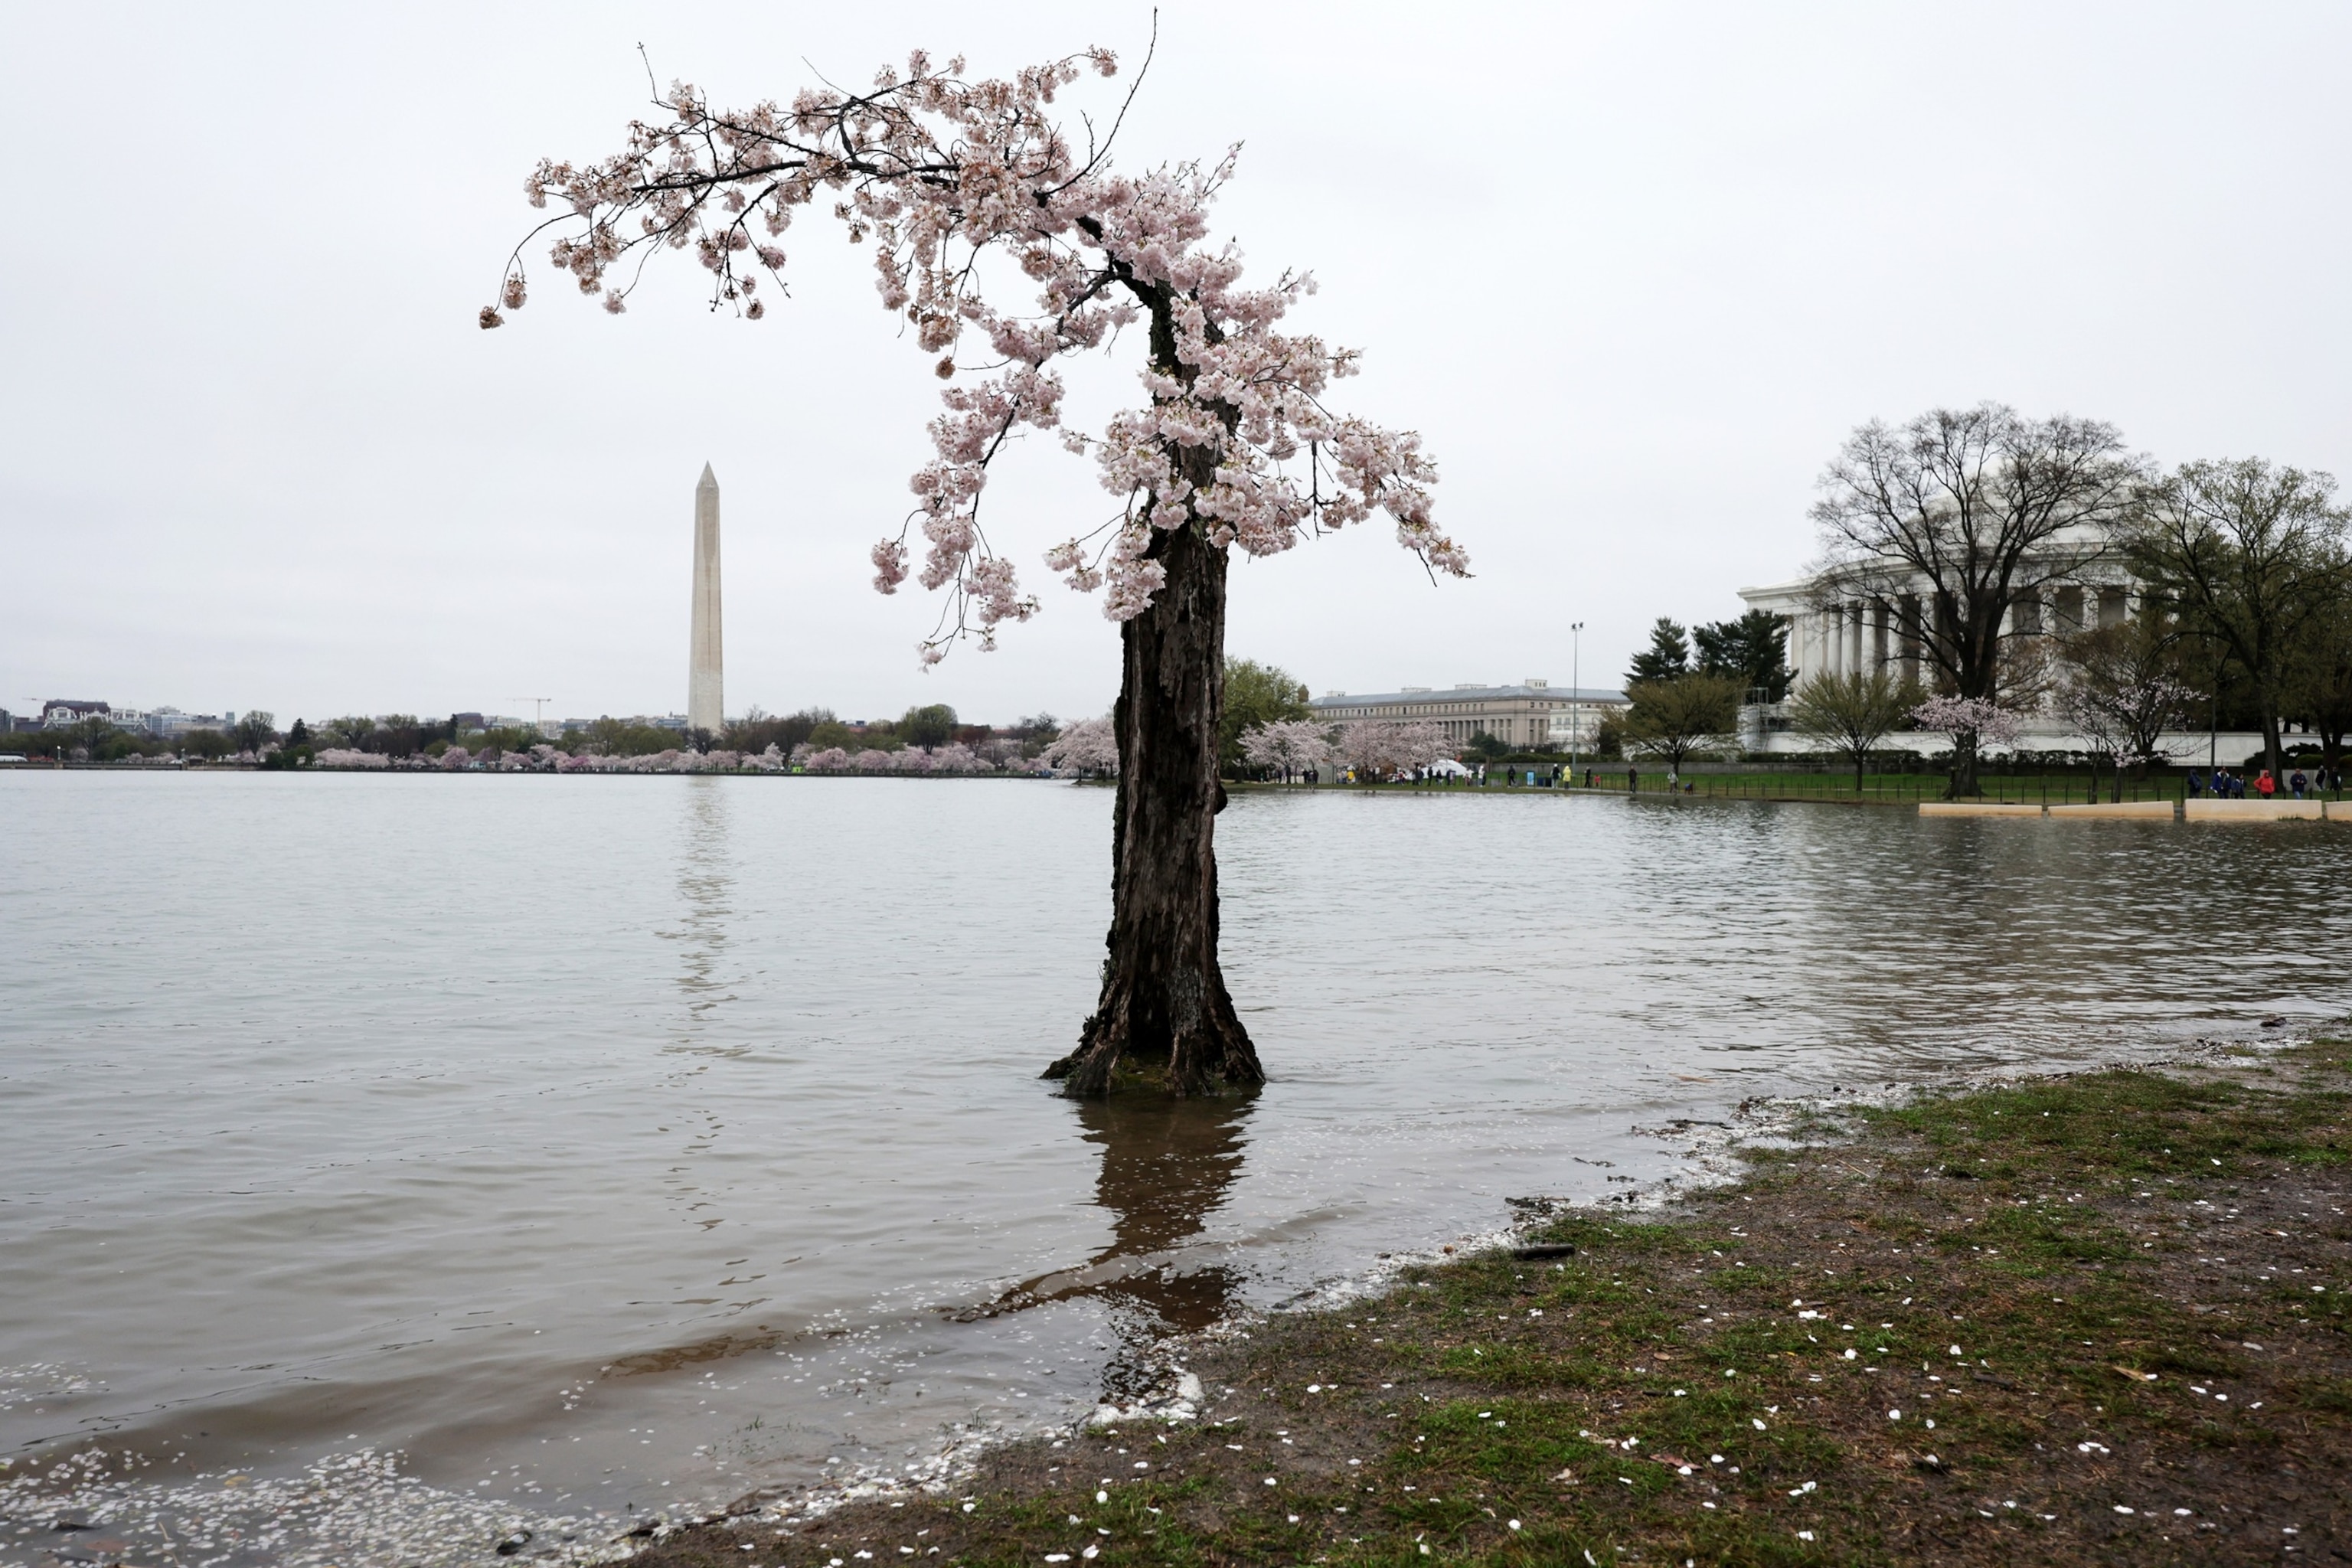 PHOTO: In this March 25, 2023, file photo, the cherry tree nicknamed "Stumpy" stands in high tide water amid cherry blossoms in peak bloom in Washington, D.C. 